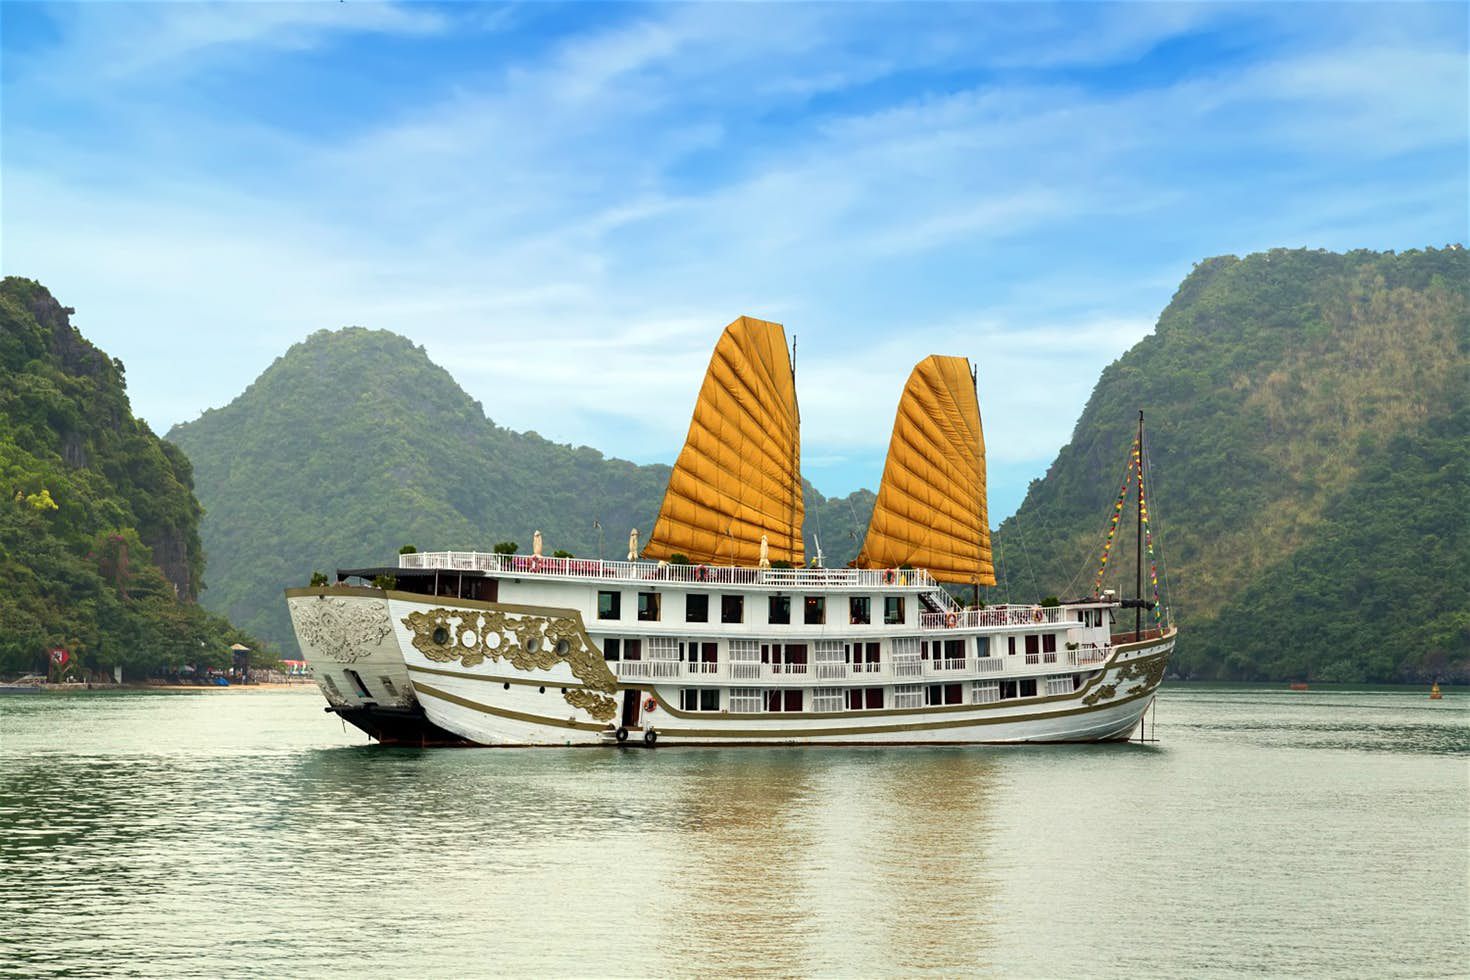 If you want to explore Halong by non-touristy routes, let's embark to cruises.